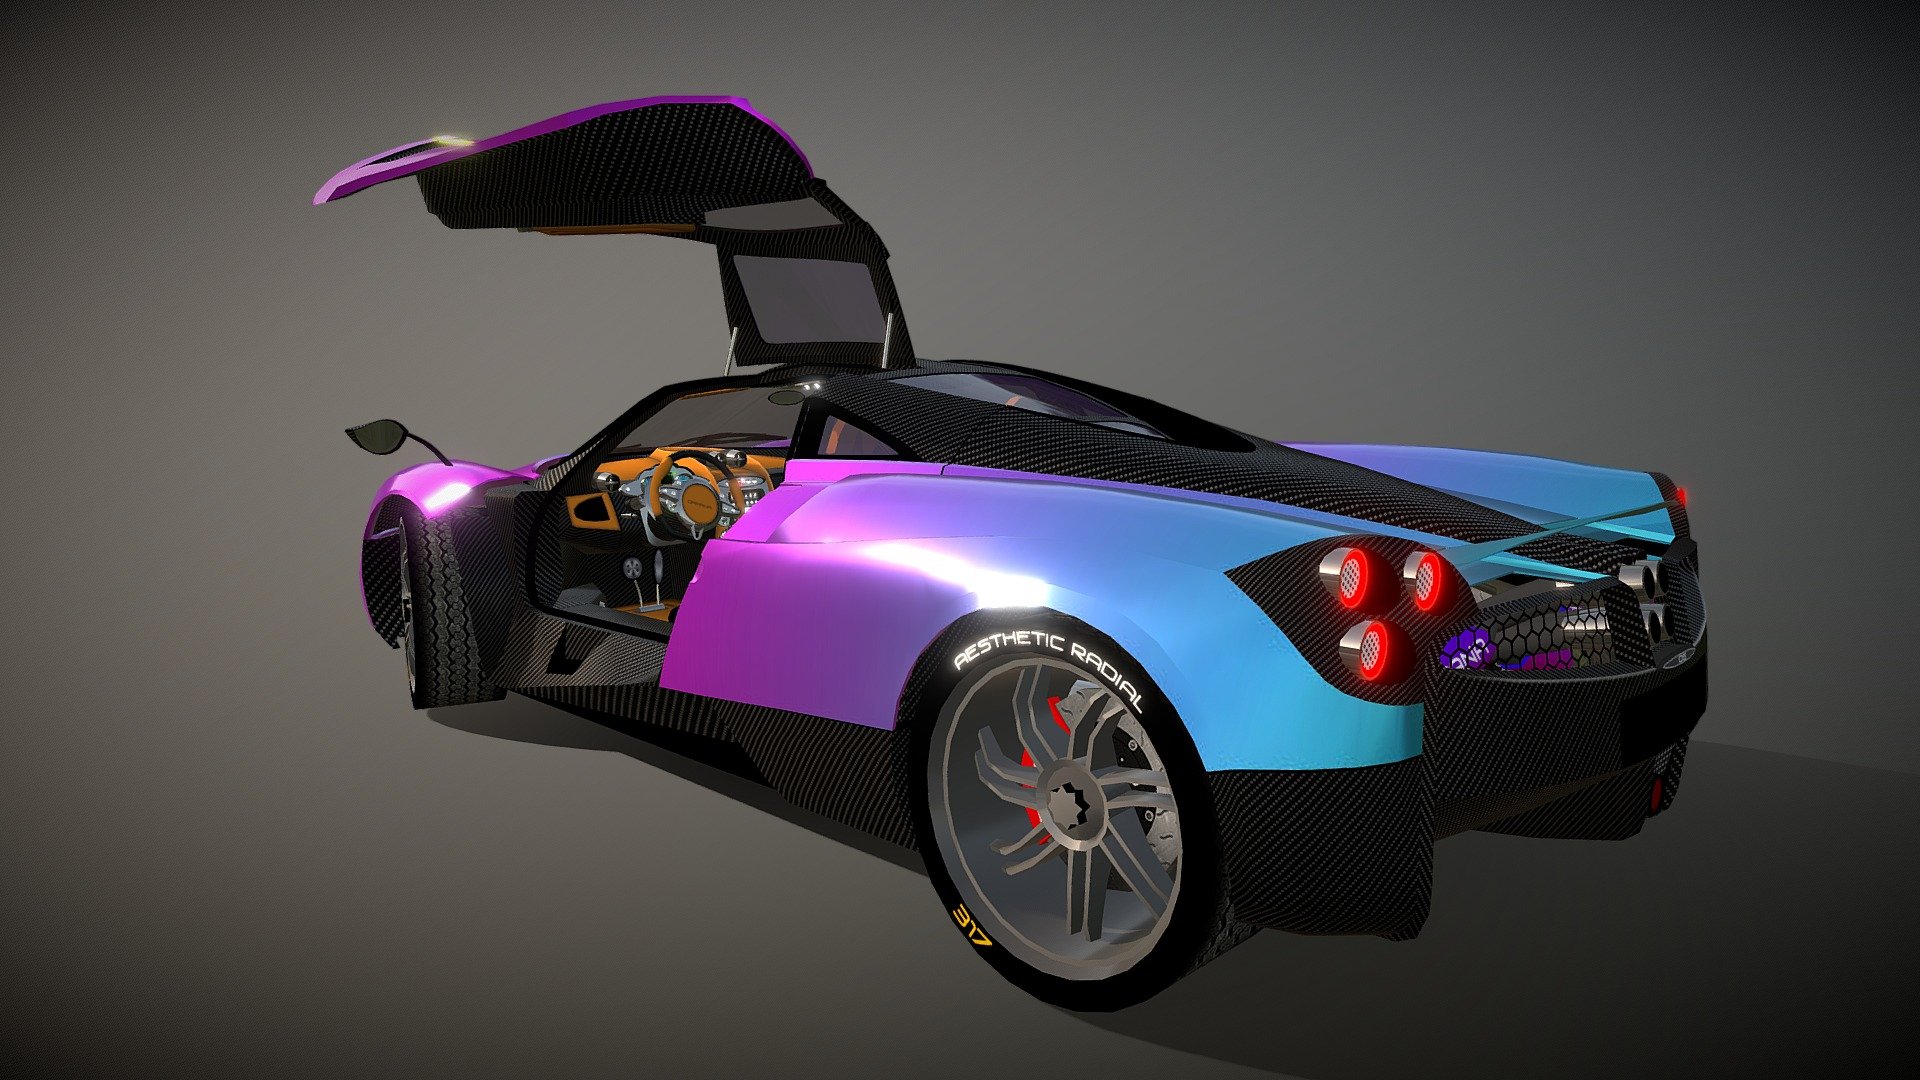 Low poly model for mobile game with interrior and moving parts
35 objects
16.5k verts
28k triangles
16.5k polygons
Textures 256x256 to 2048x2048
Created in blender3d 2021, Photoshop 2021 - Pagani Huayra - 3D model by OG Cars (@zigzag977010) 3d model